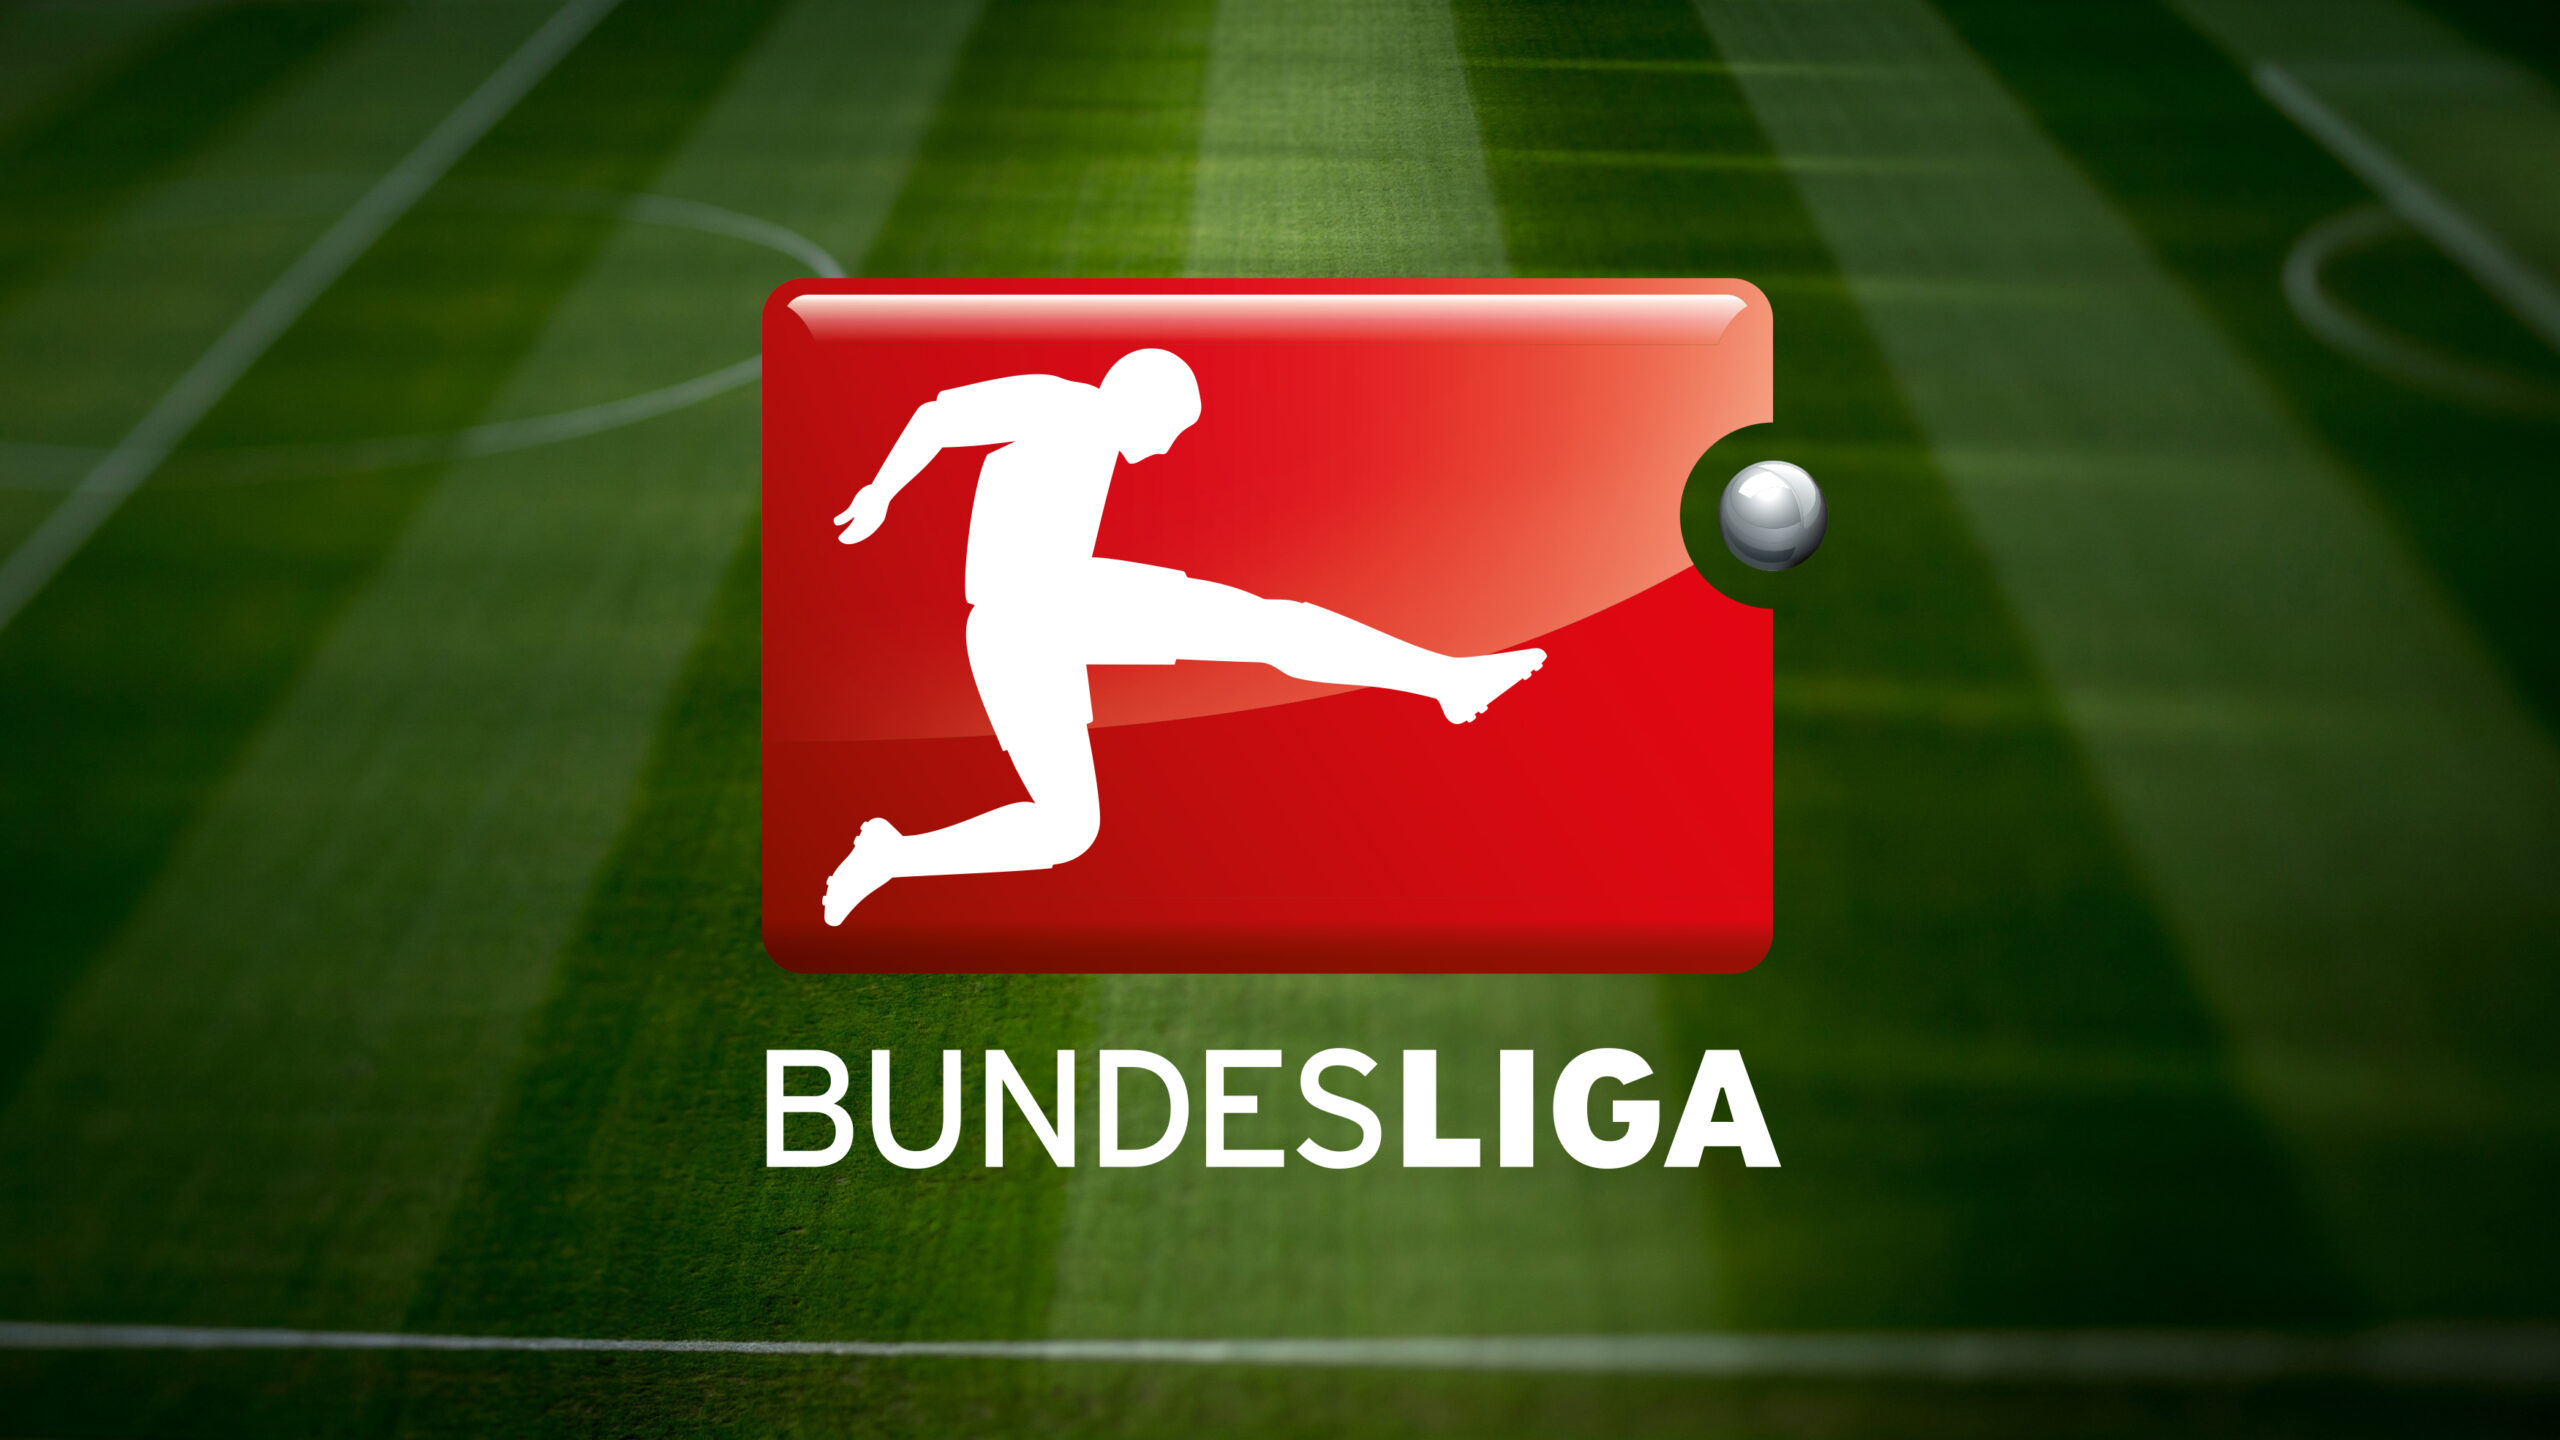 more-than-a-third-of-bundesliga-clubs-could-go-bankrupt-due-to-coronavirus